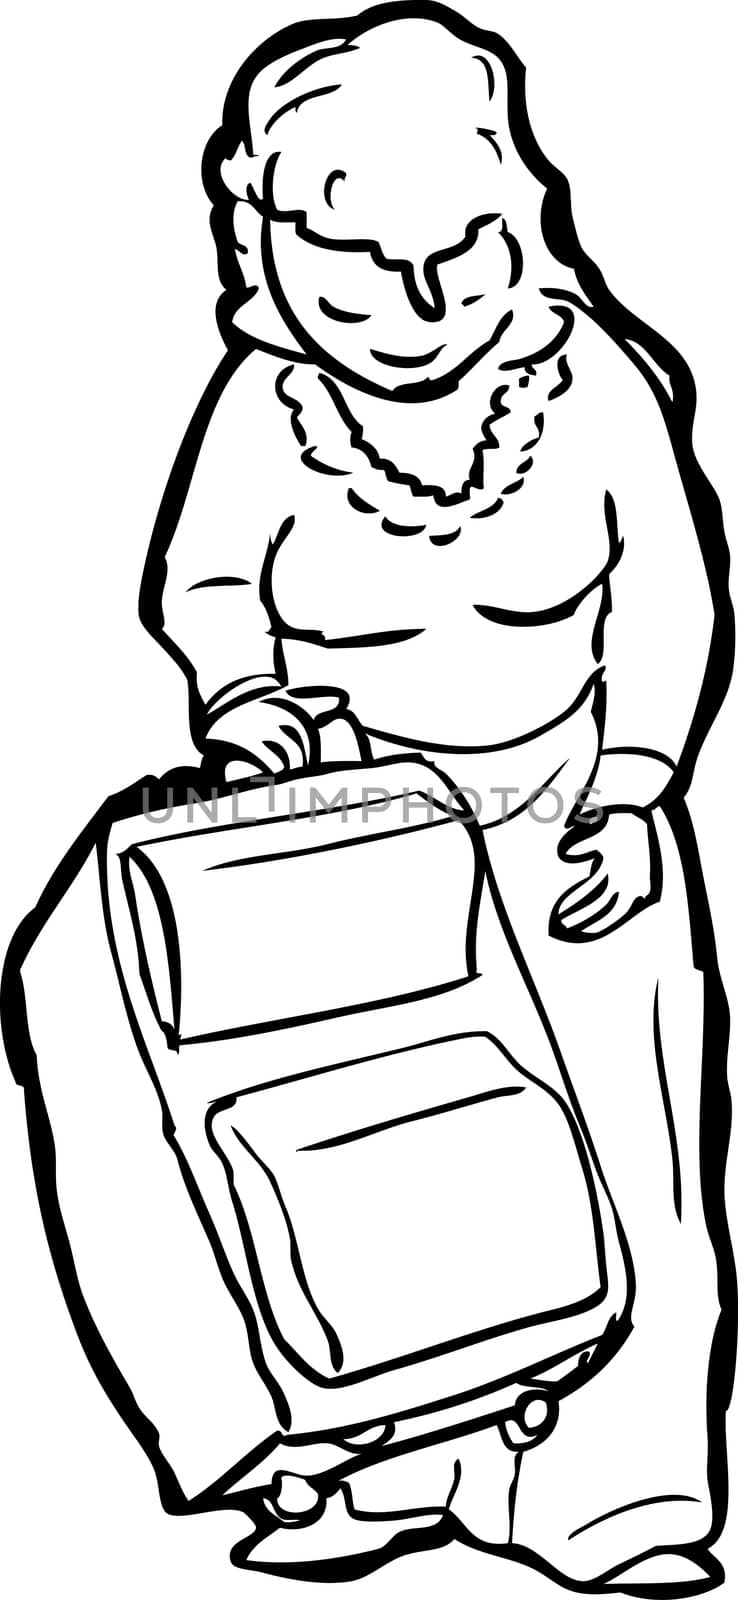 Outline of Lady Lifting Suitcase by TheBlackRhino